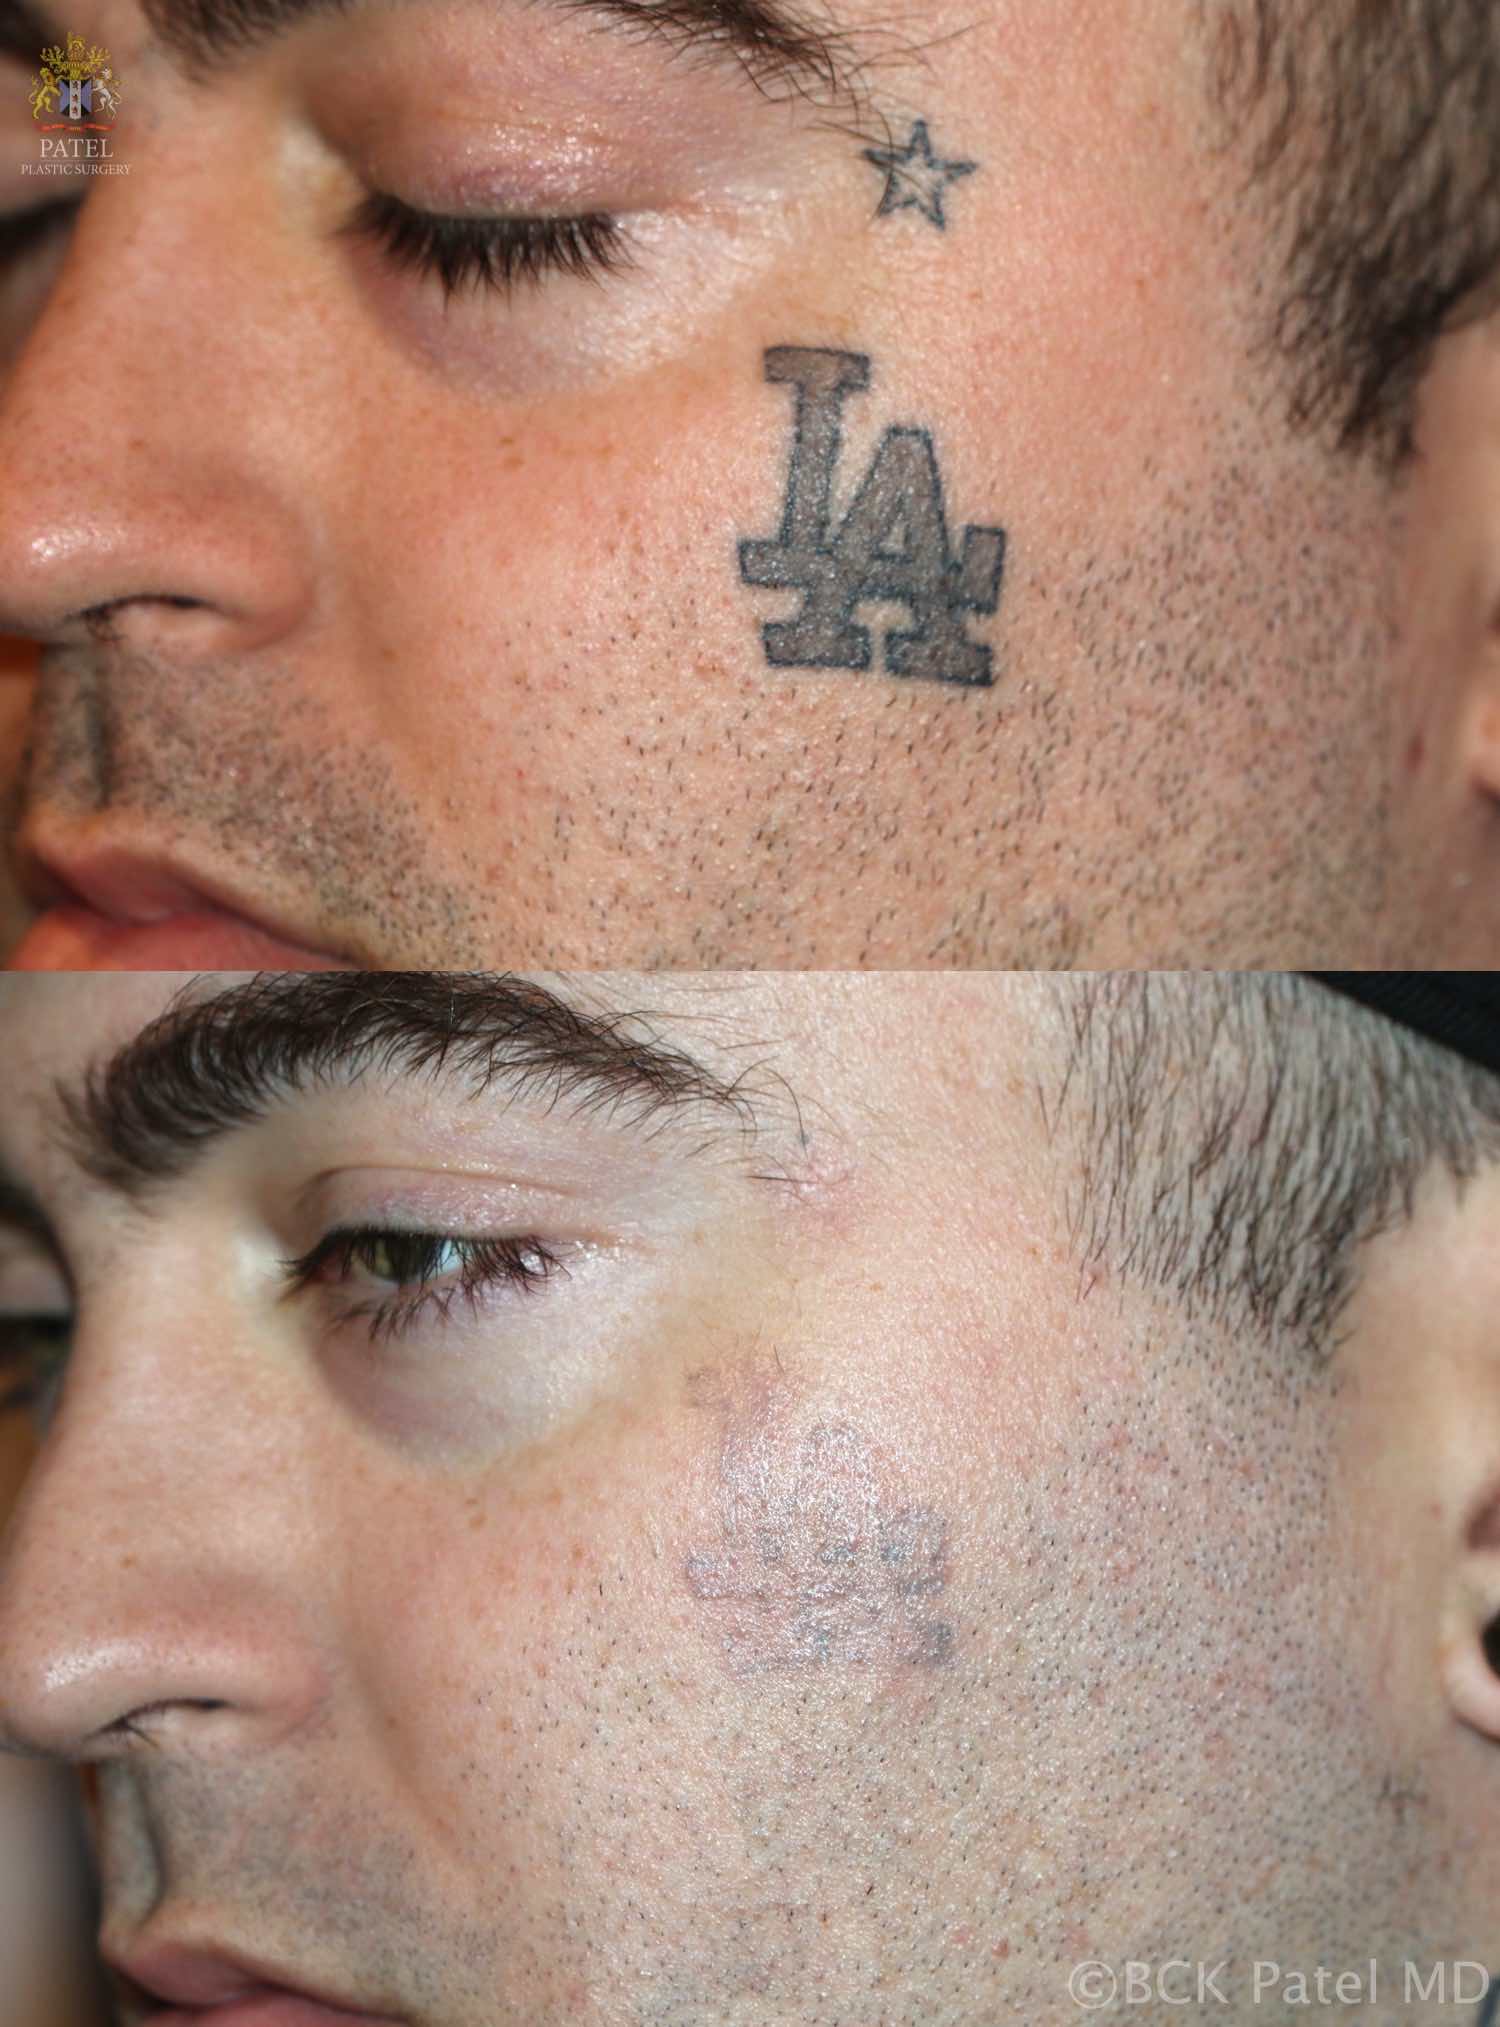 englishsurgeon.com. Photos showing removal of face dark tattoo with the laser. BCK Patel MD, FRCS, Salt Lake City, Utah, St. George